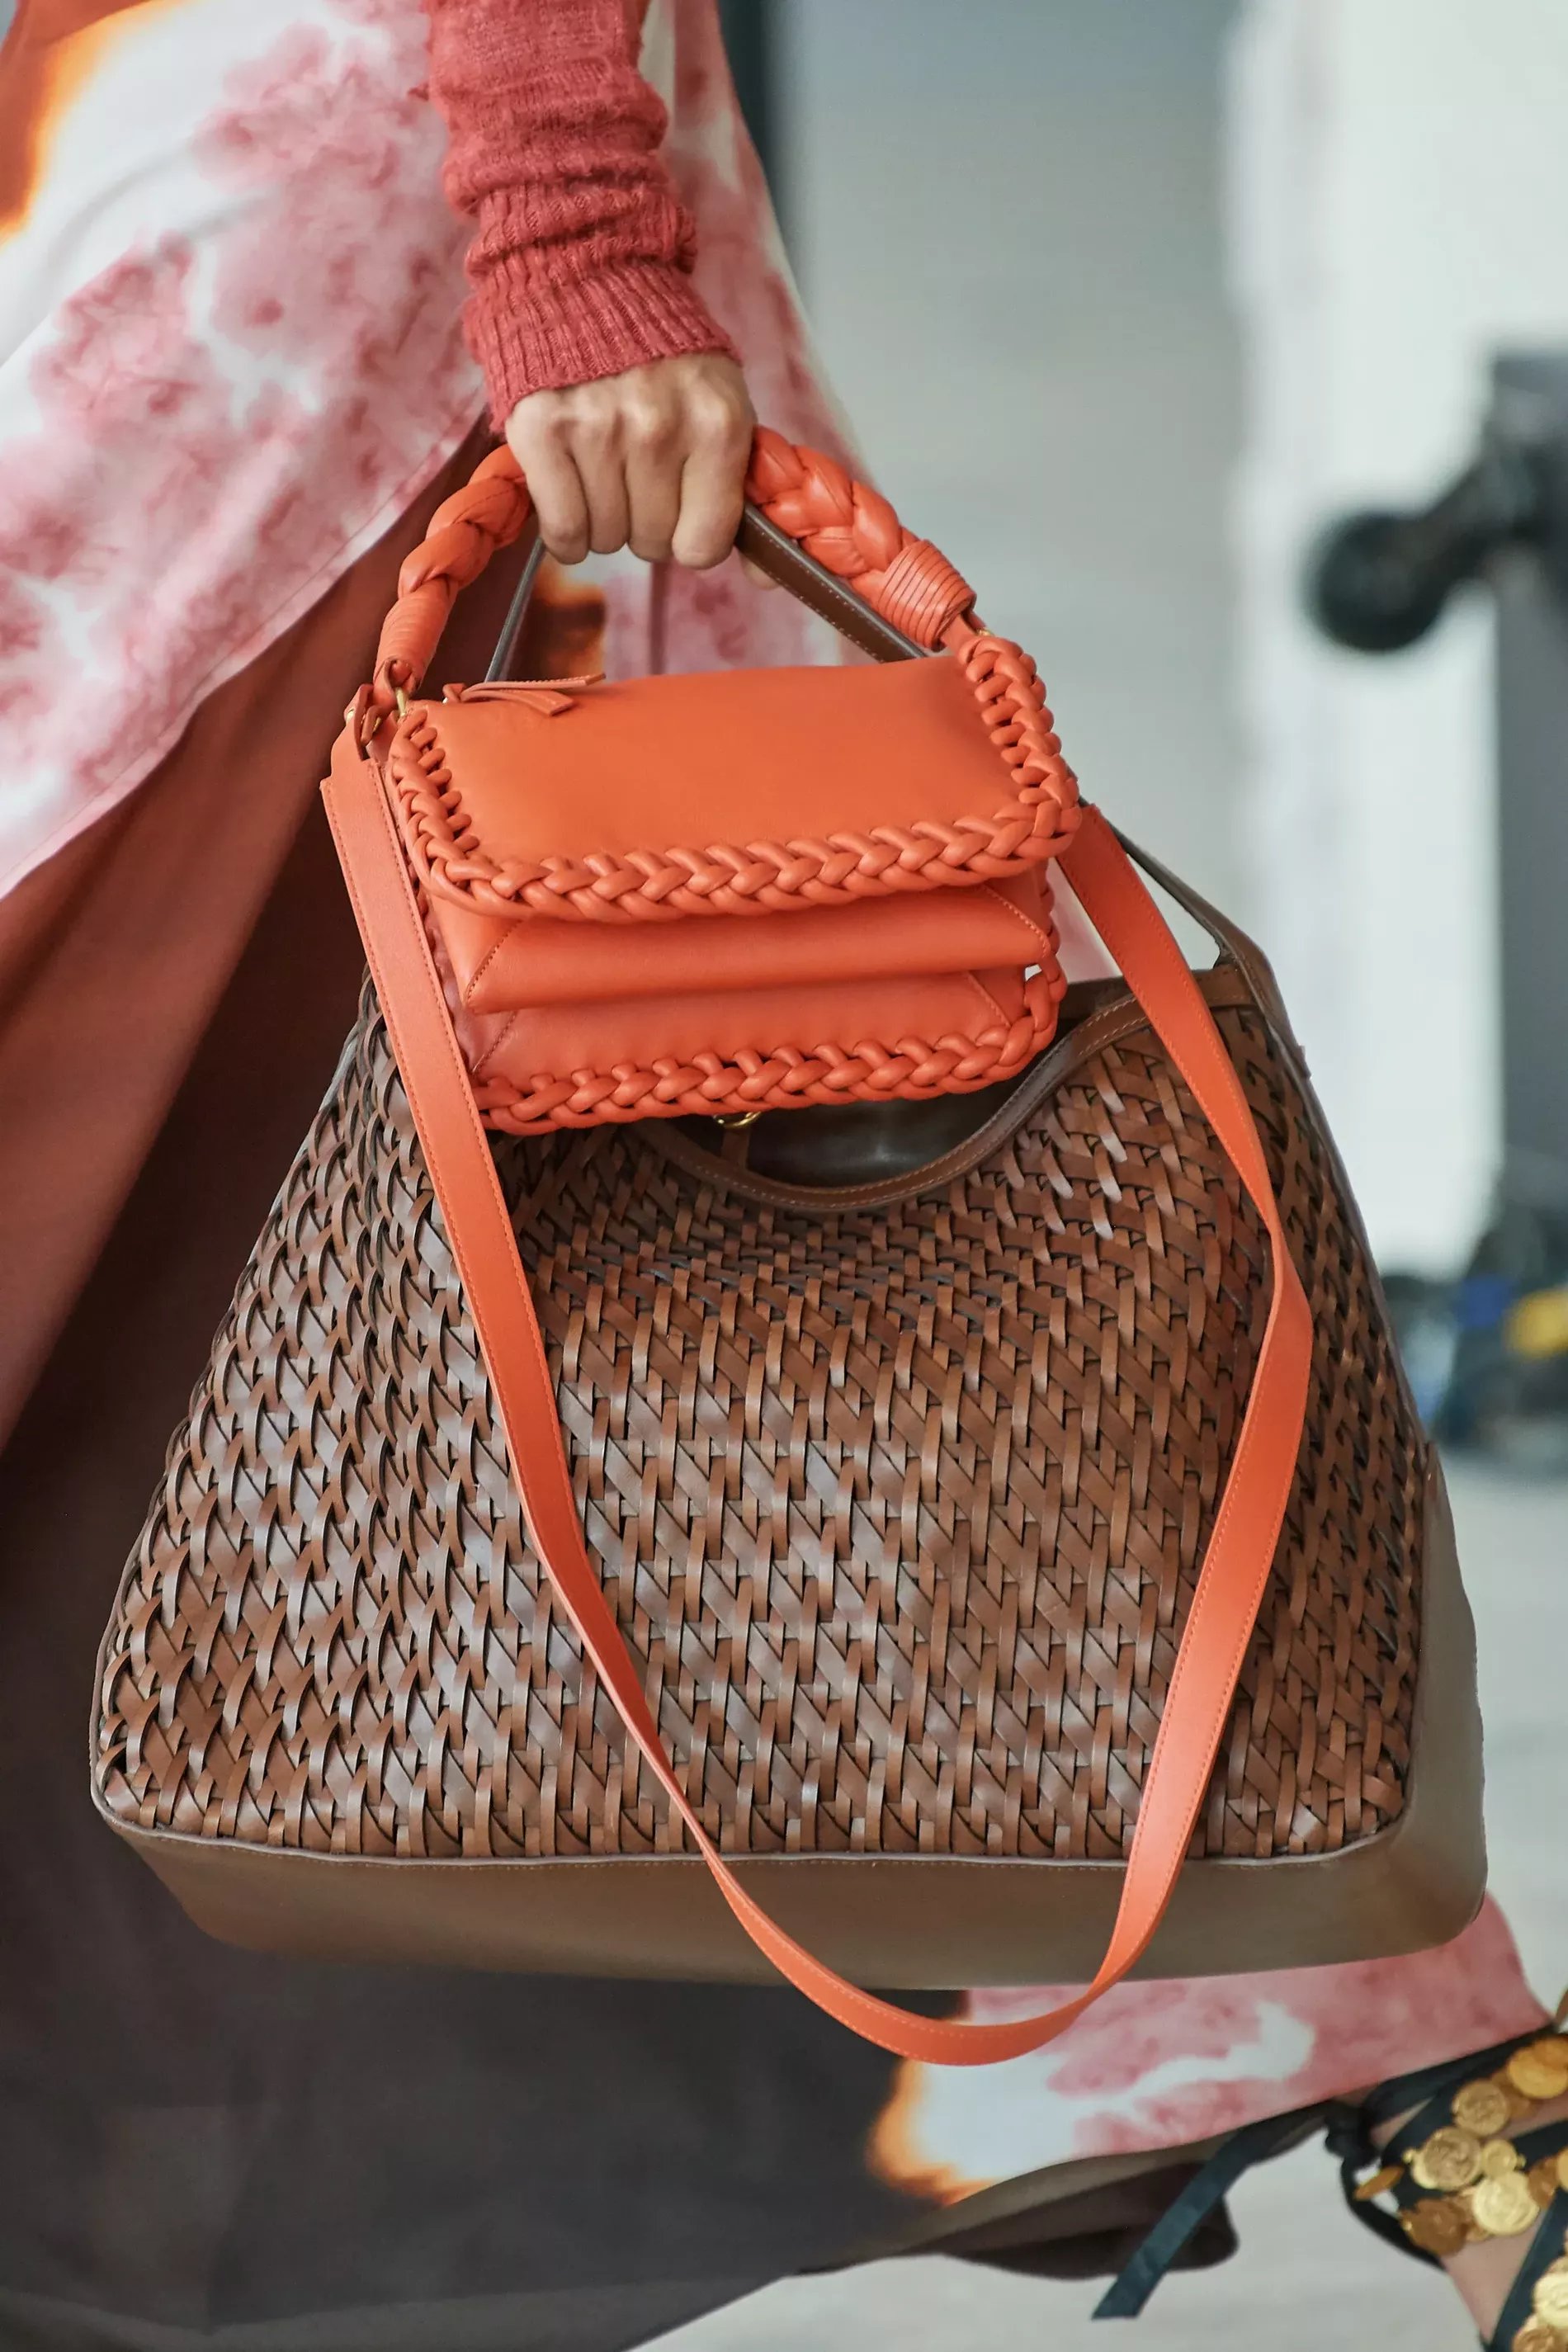 The Micro Bag Trend Were Carrying into 2022